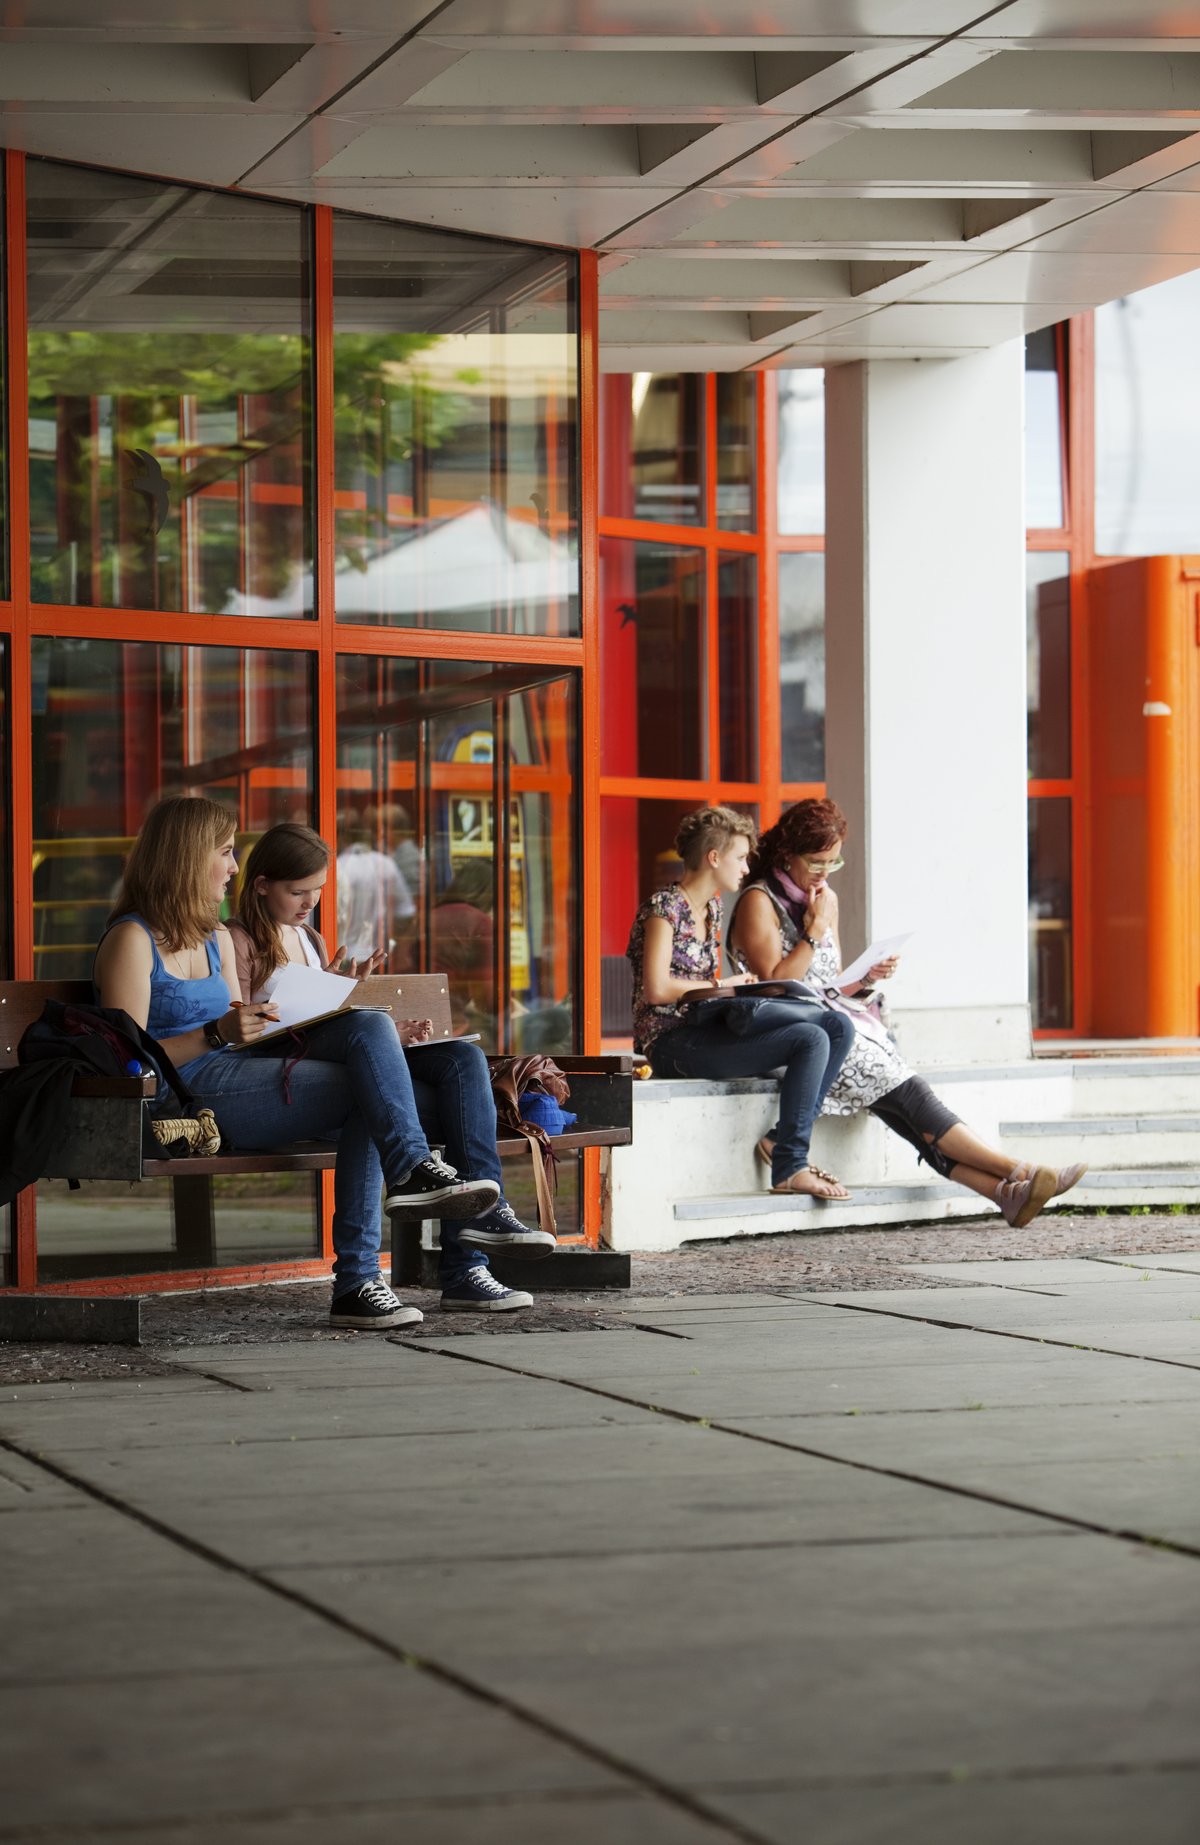 Students in the university courtyard